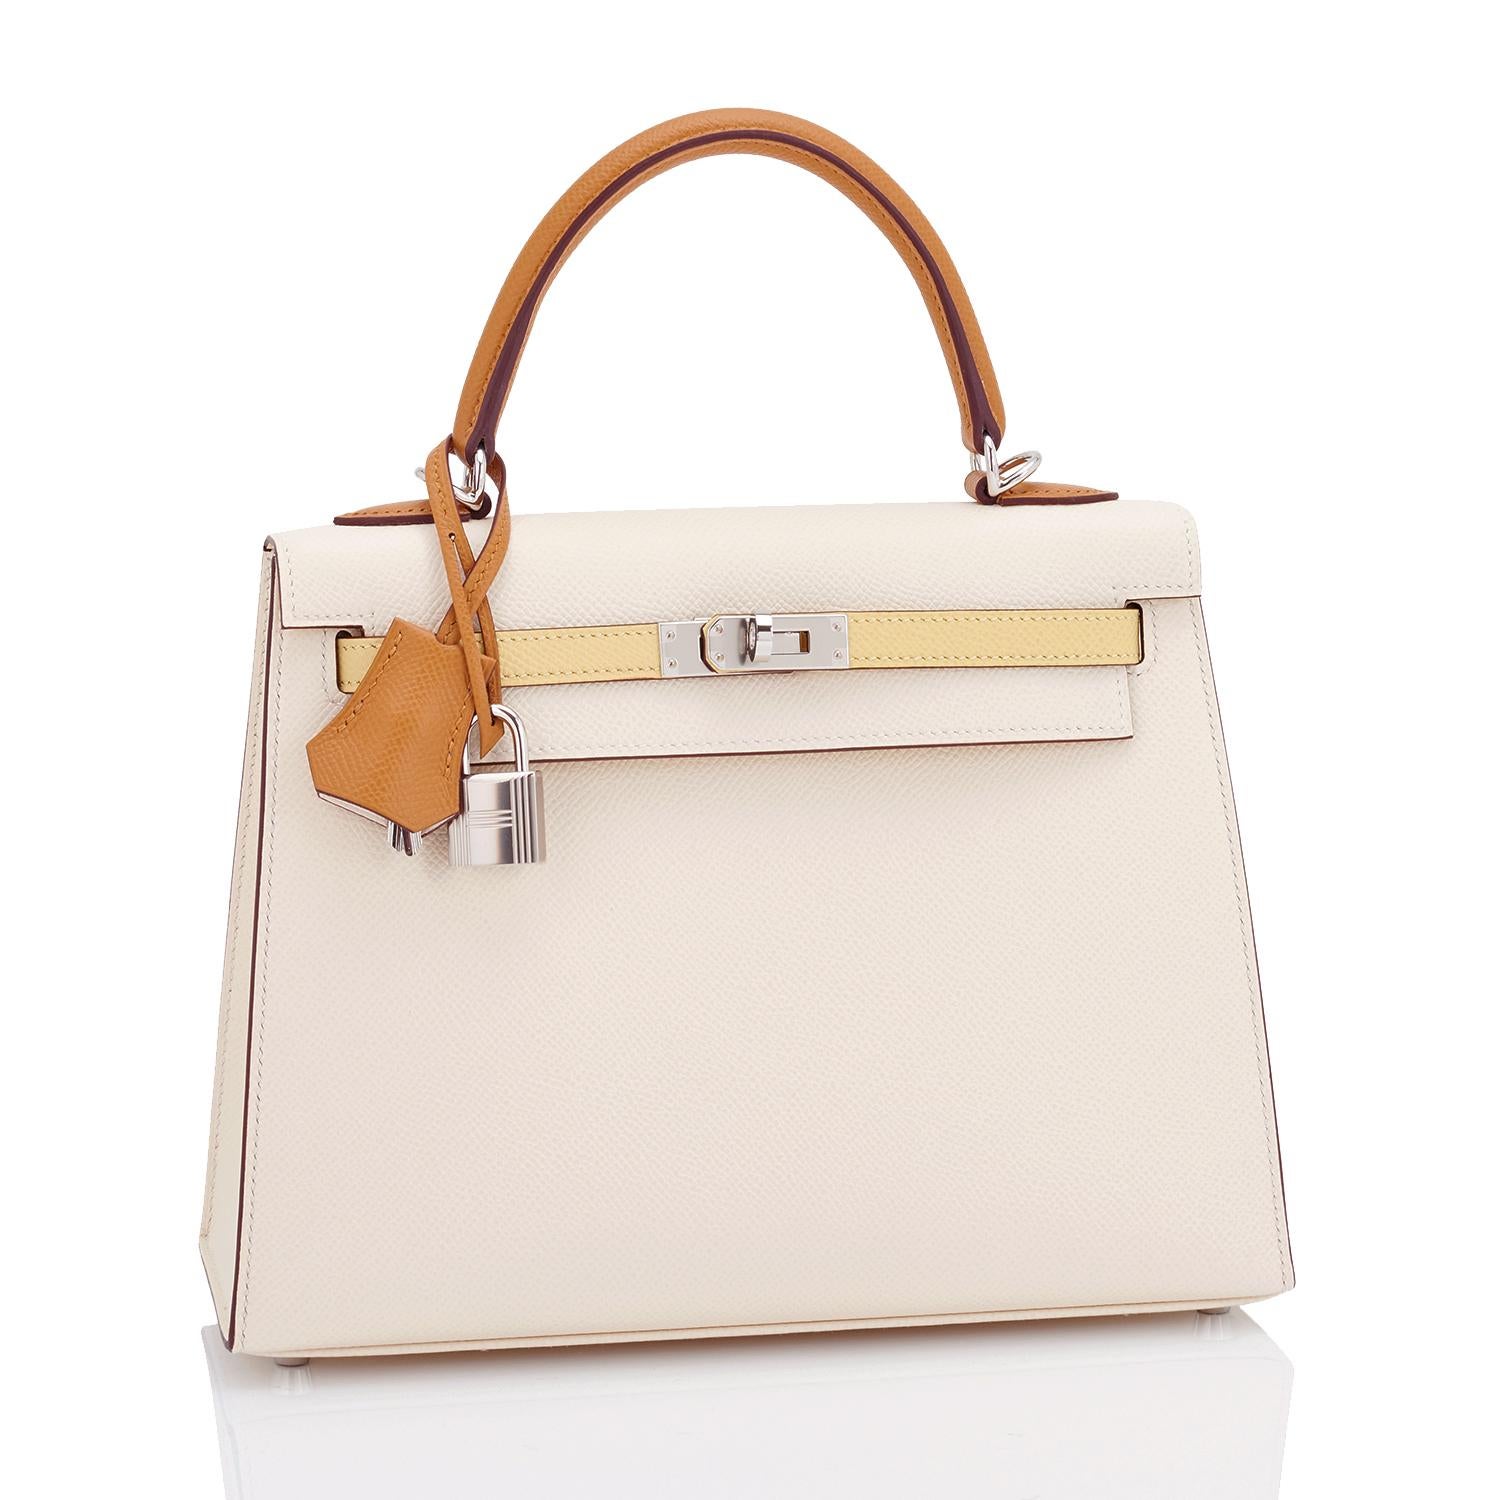 Hermes Kelly 25cm Tri-Color Nata Sesame Jaune Poussin VIP Limited Z Stamp, 2021
Just purchased from Hermes store; bag bears new interior 2021 Z Stamp.
Brand New in Box. Store Fresh. Pristine Condition (with plastic on hardware).
Perfect gift! Comes